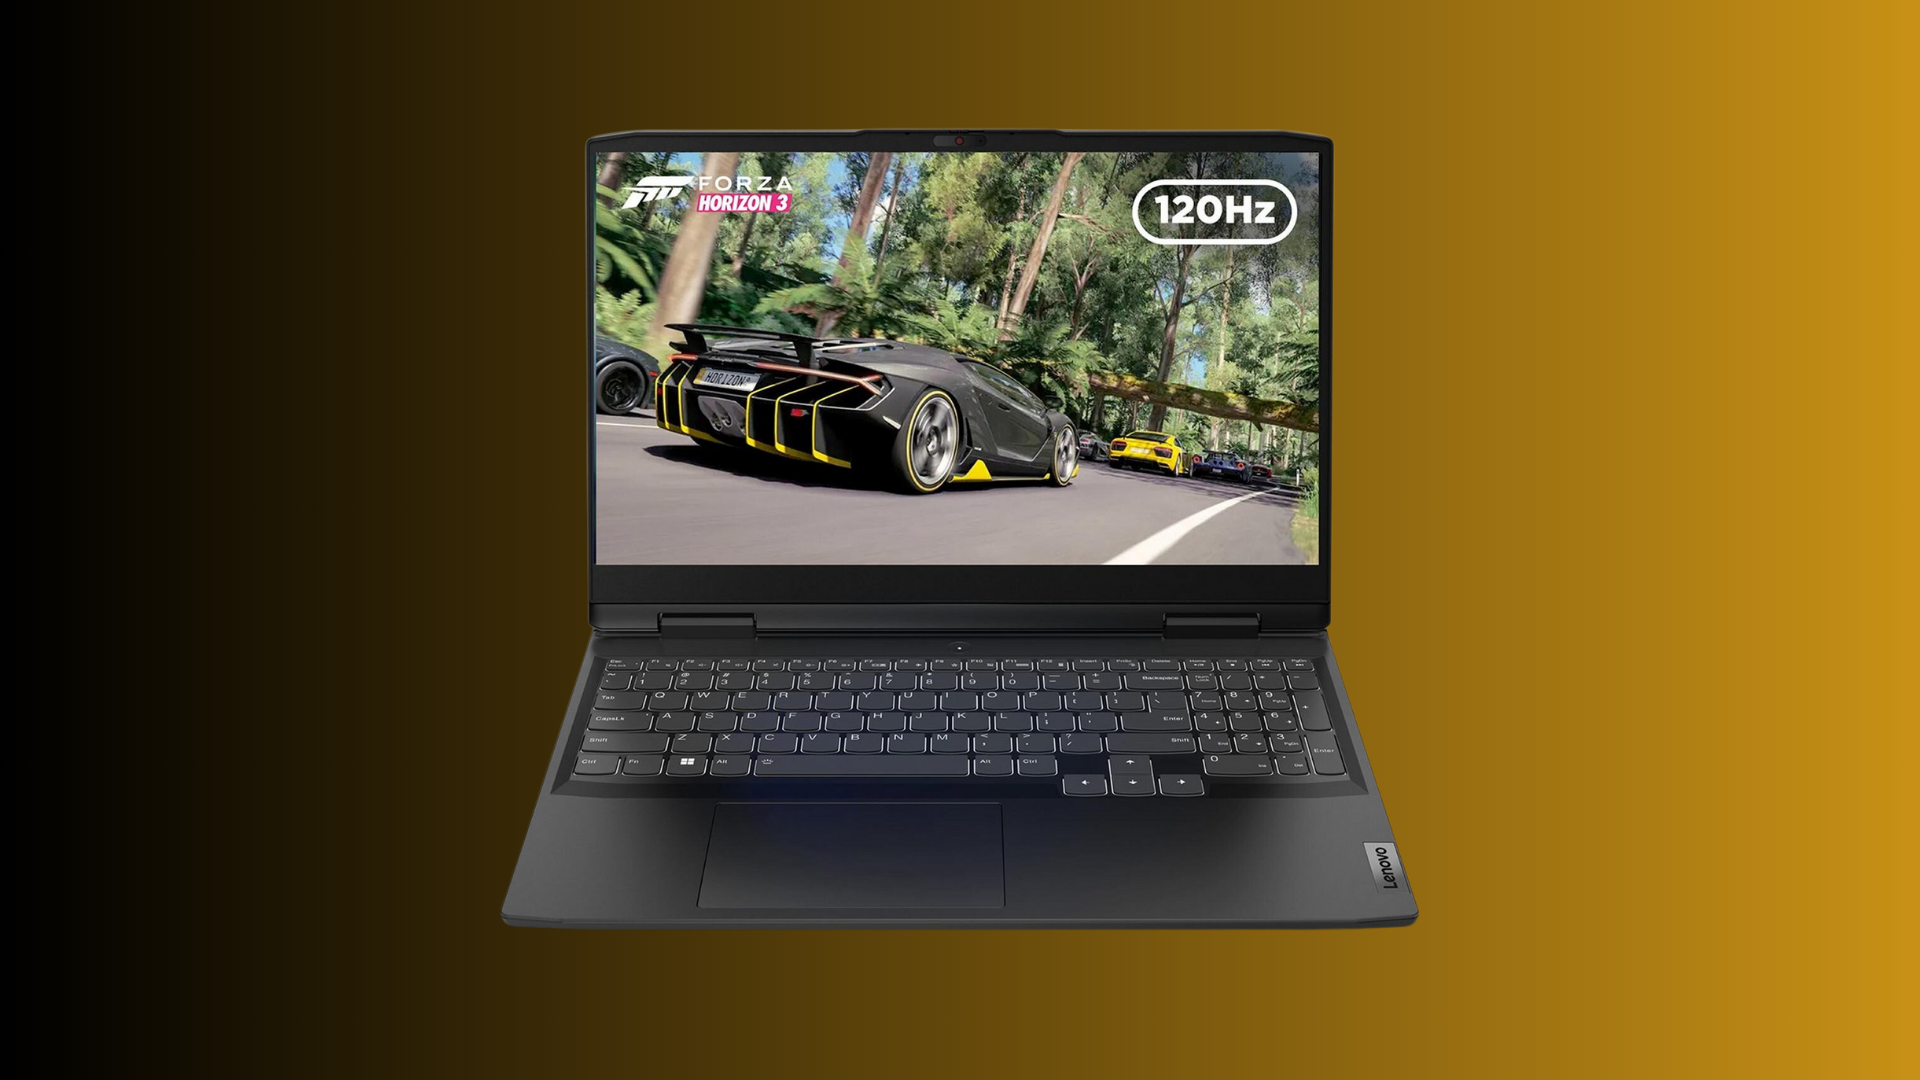 This Lenovo IdeaPad laptop just became a bargain choice for gamers